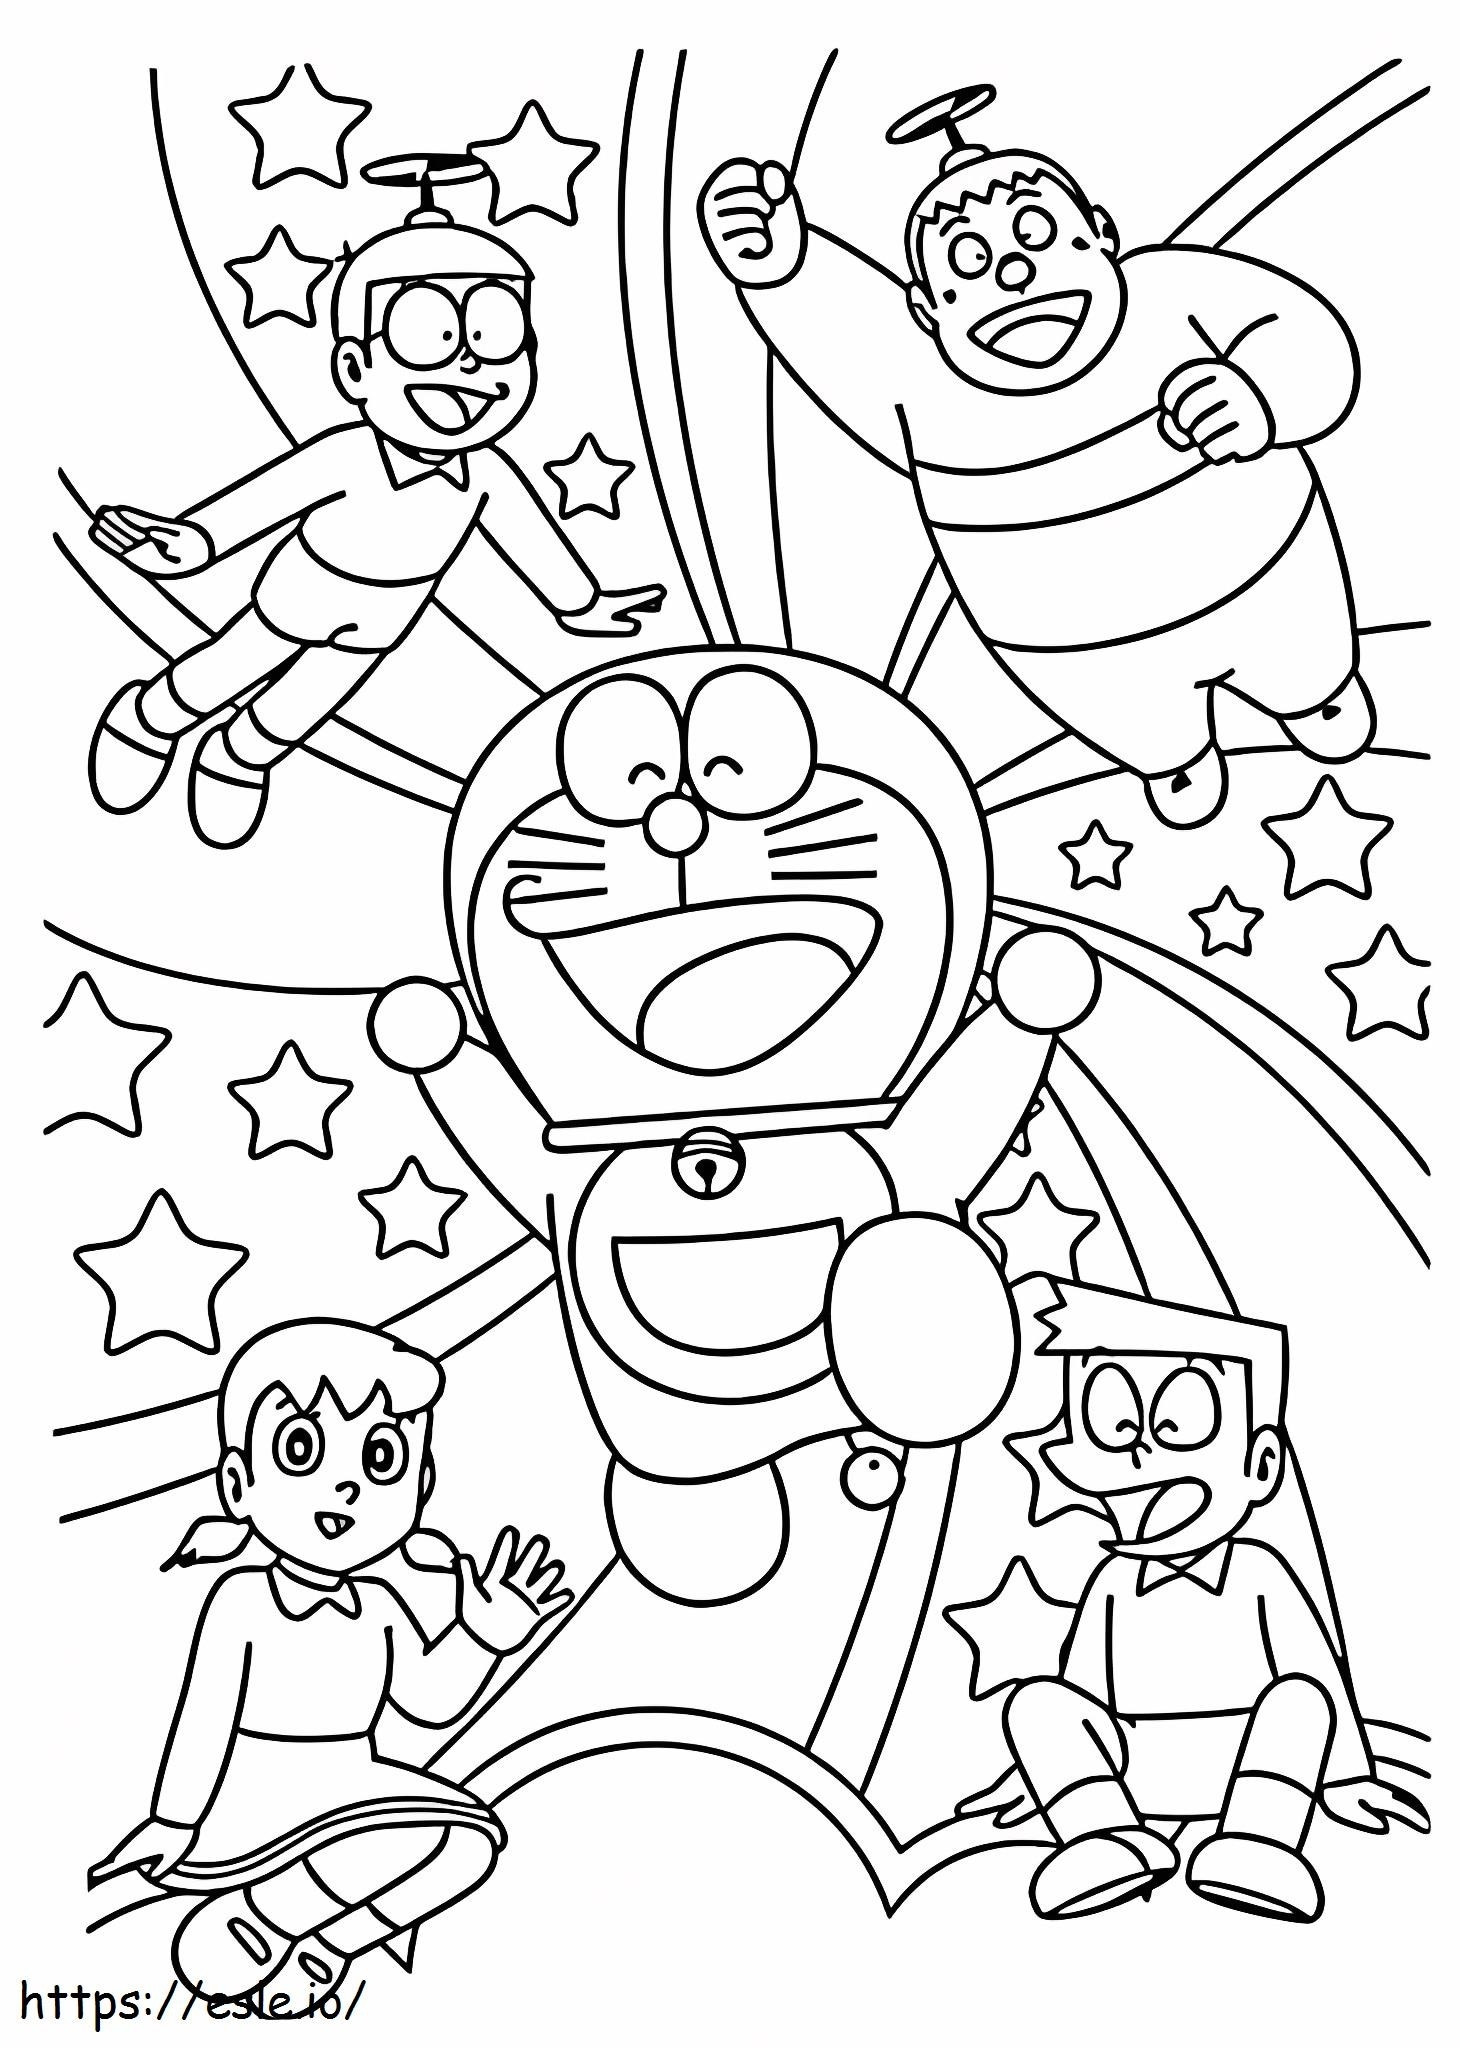 Nobita And Fun Team coloring page